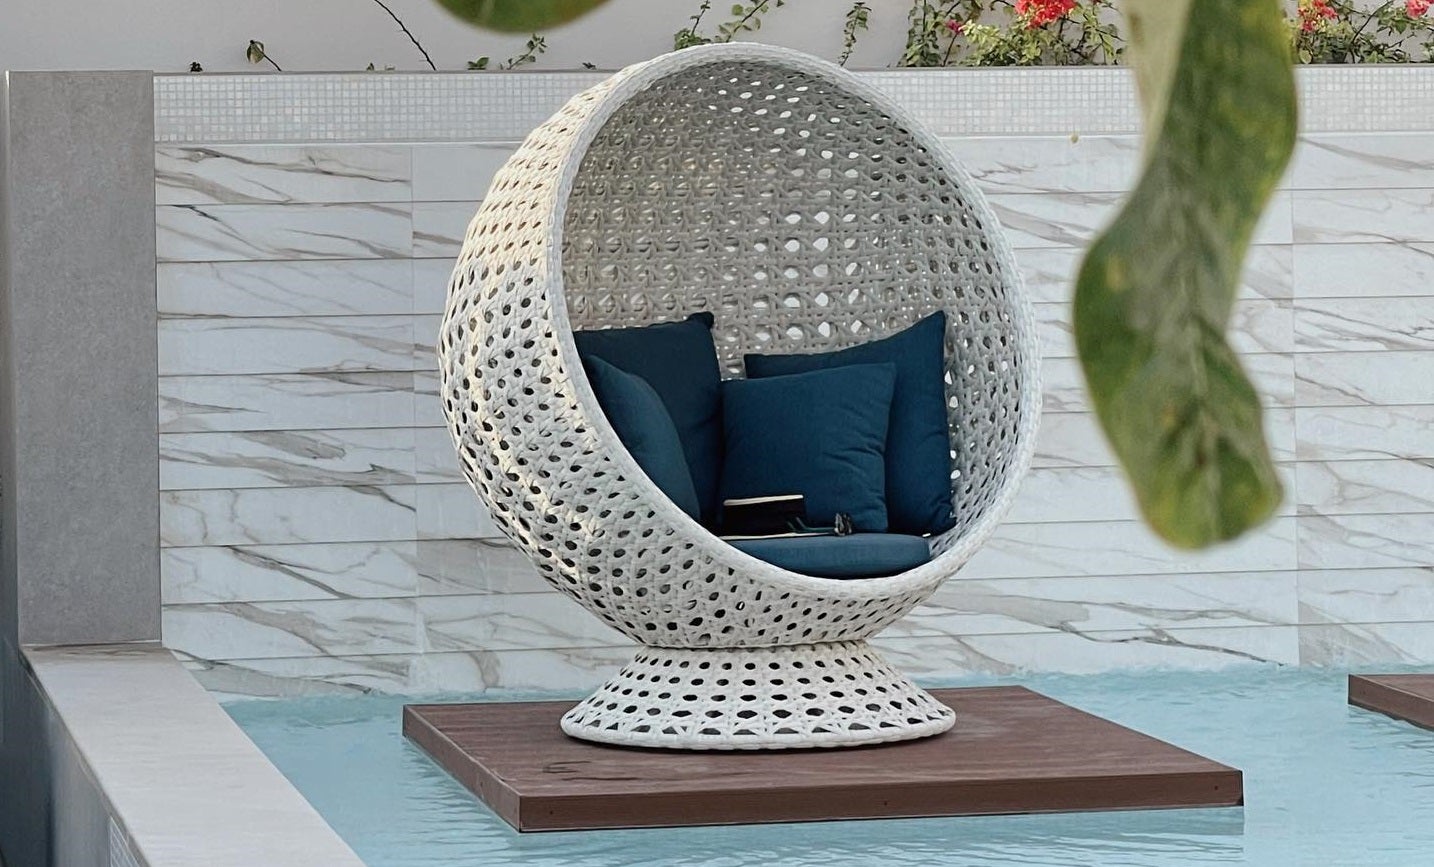 Modern and minimalist in design, this rotating cocoon chair offers shade and privacy to the lounger. Open weave rattan cane pattern with solid metal structure ensures stability and safety. This outdoor collection is timeless and carefully